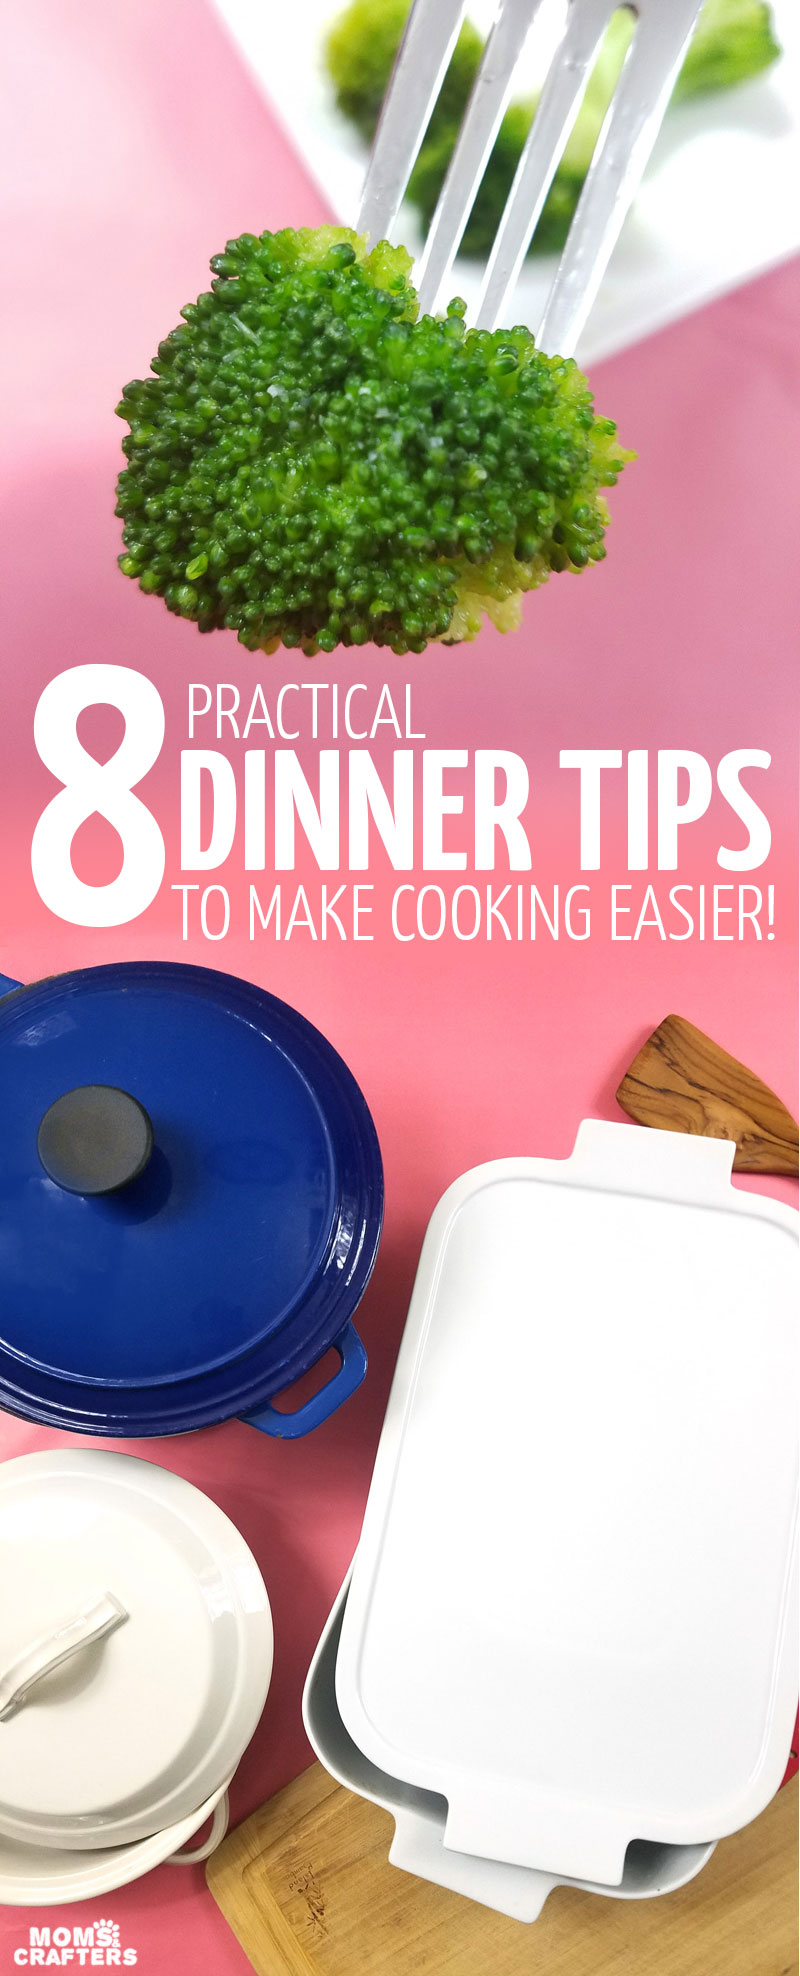 These simple meal prep tips include your guide to one dish dinners - because making dinner shouldn't be a chore! #mealprep #onepot #momsandcrafters